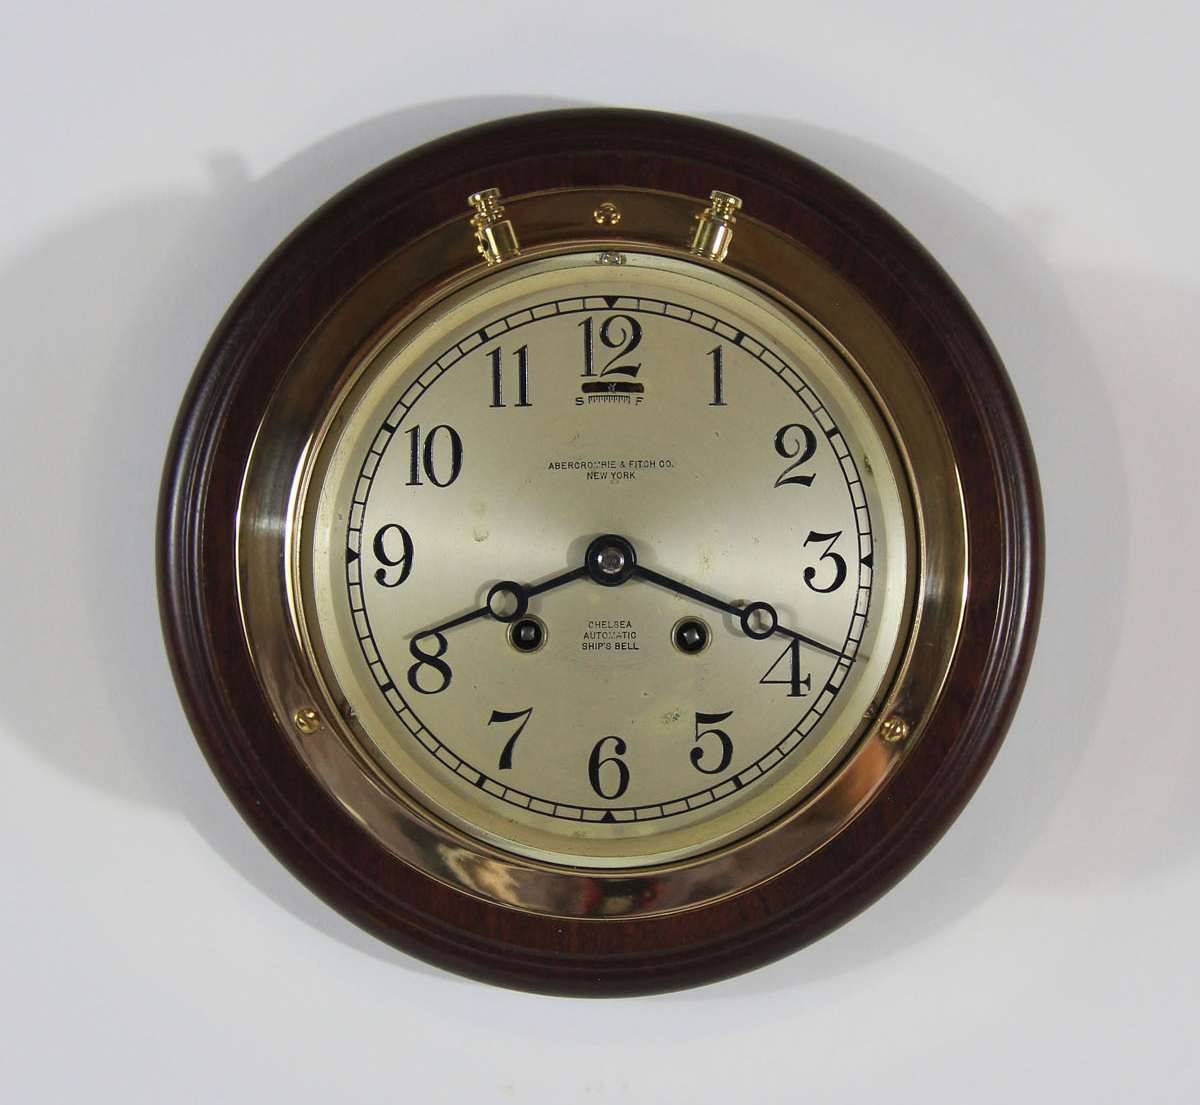 Chelsea 6 inch Automatic Ships Bell Clock